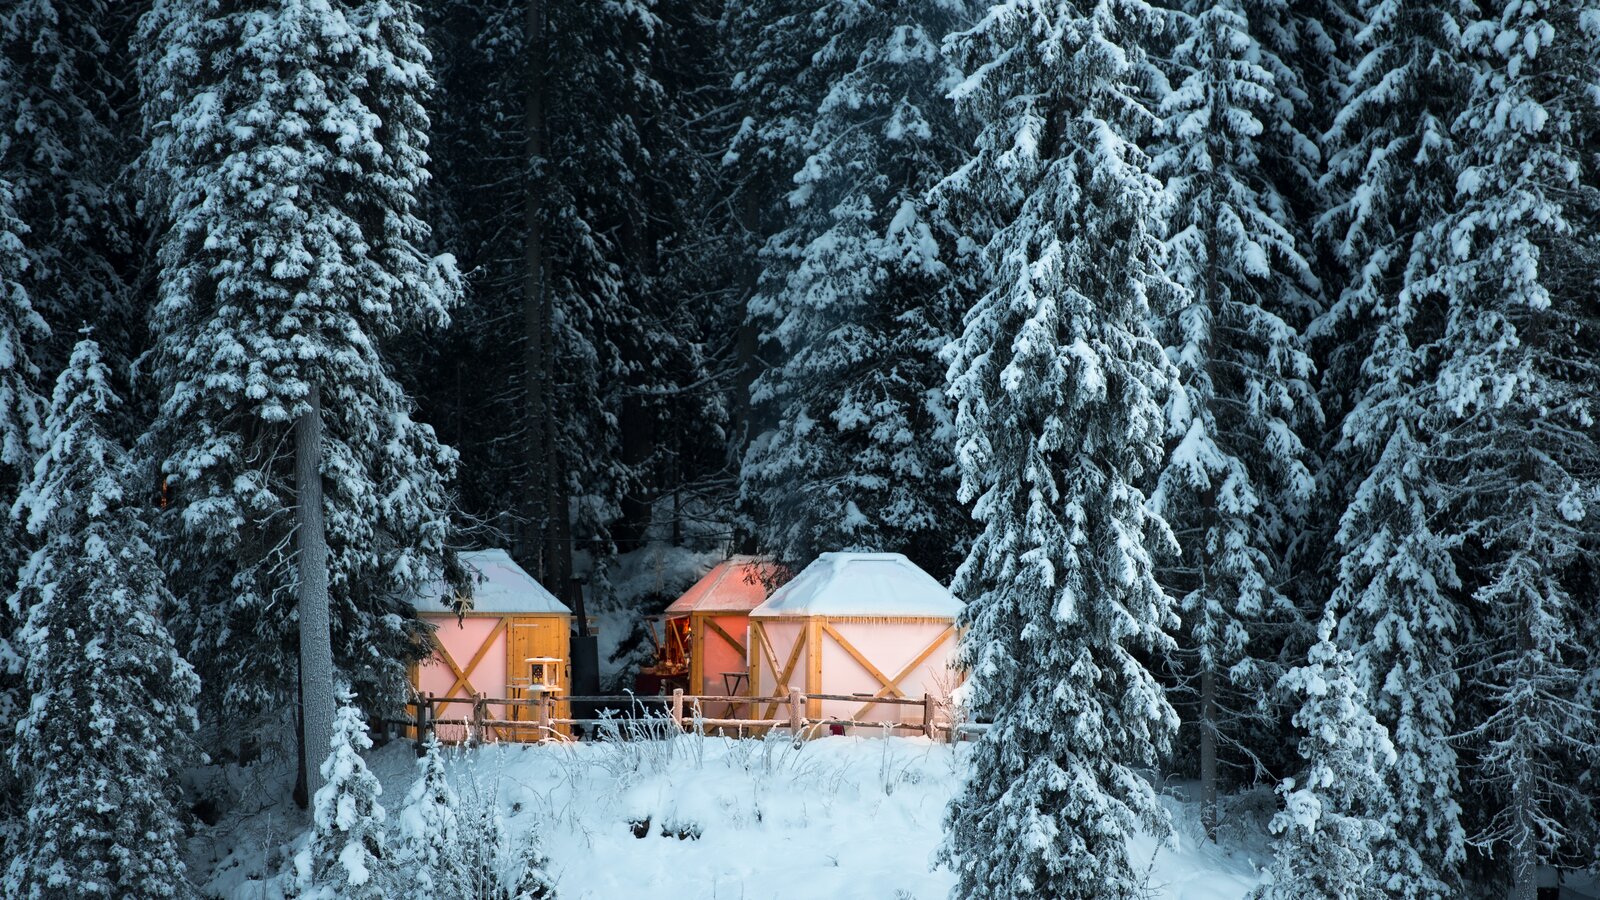 Illuminated huts in snowy winter forest | © Armin Mair (Indio)